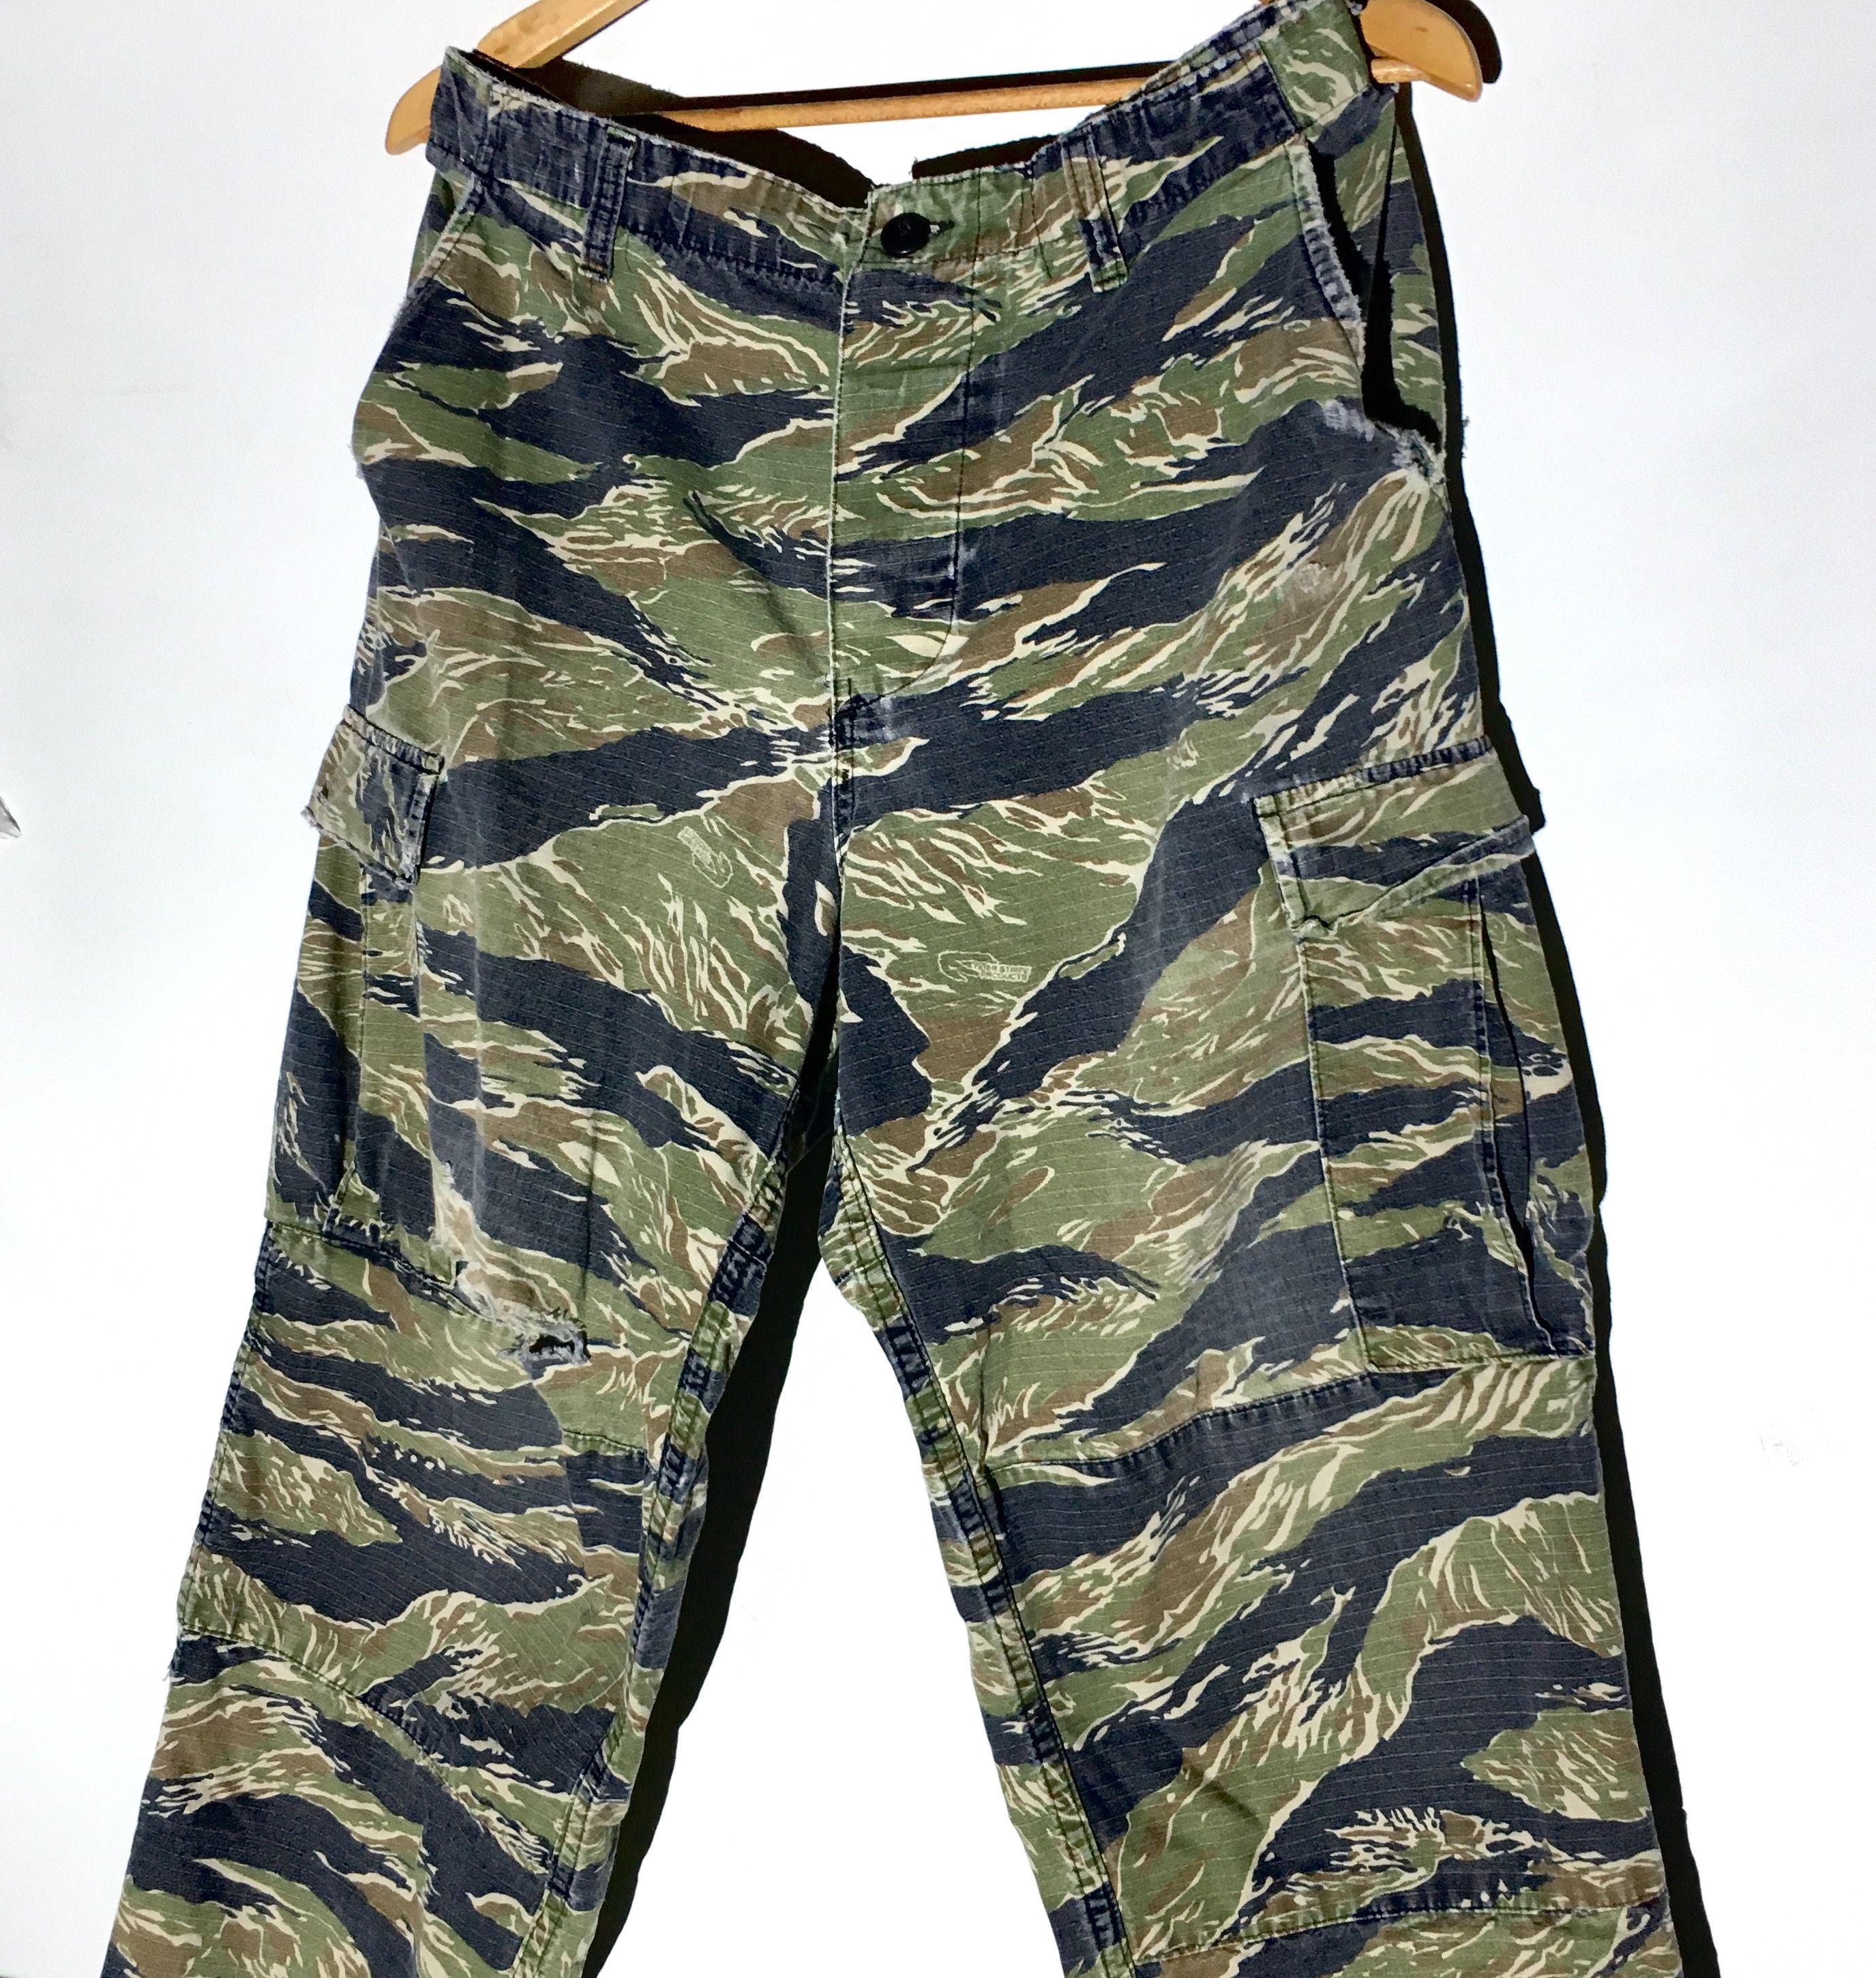 Vintage Vintage Military Issued Tiger Stripe Camo Cargo Pants Size US 32 / EU 48 - 1 Preview